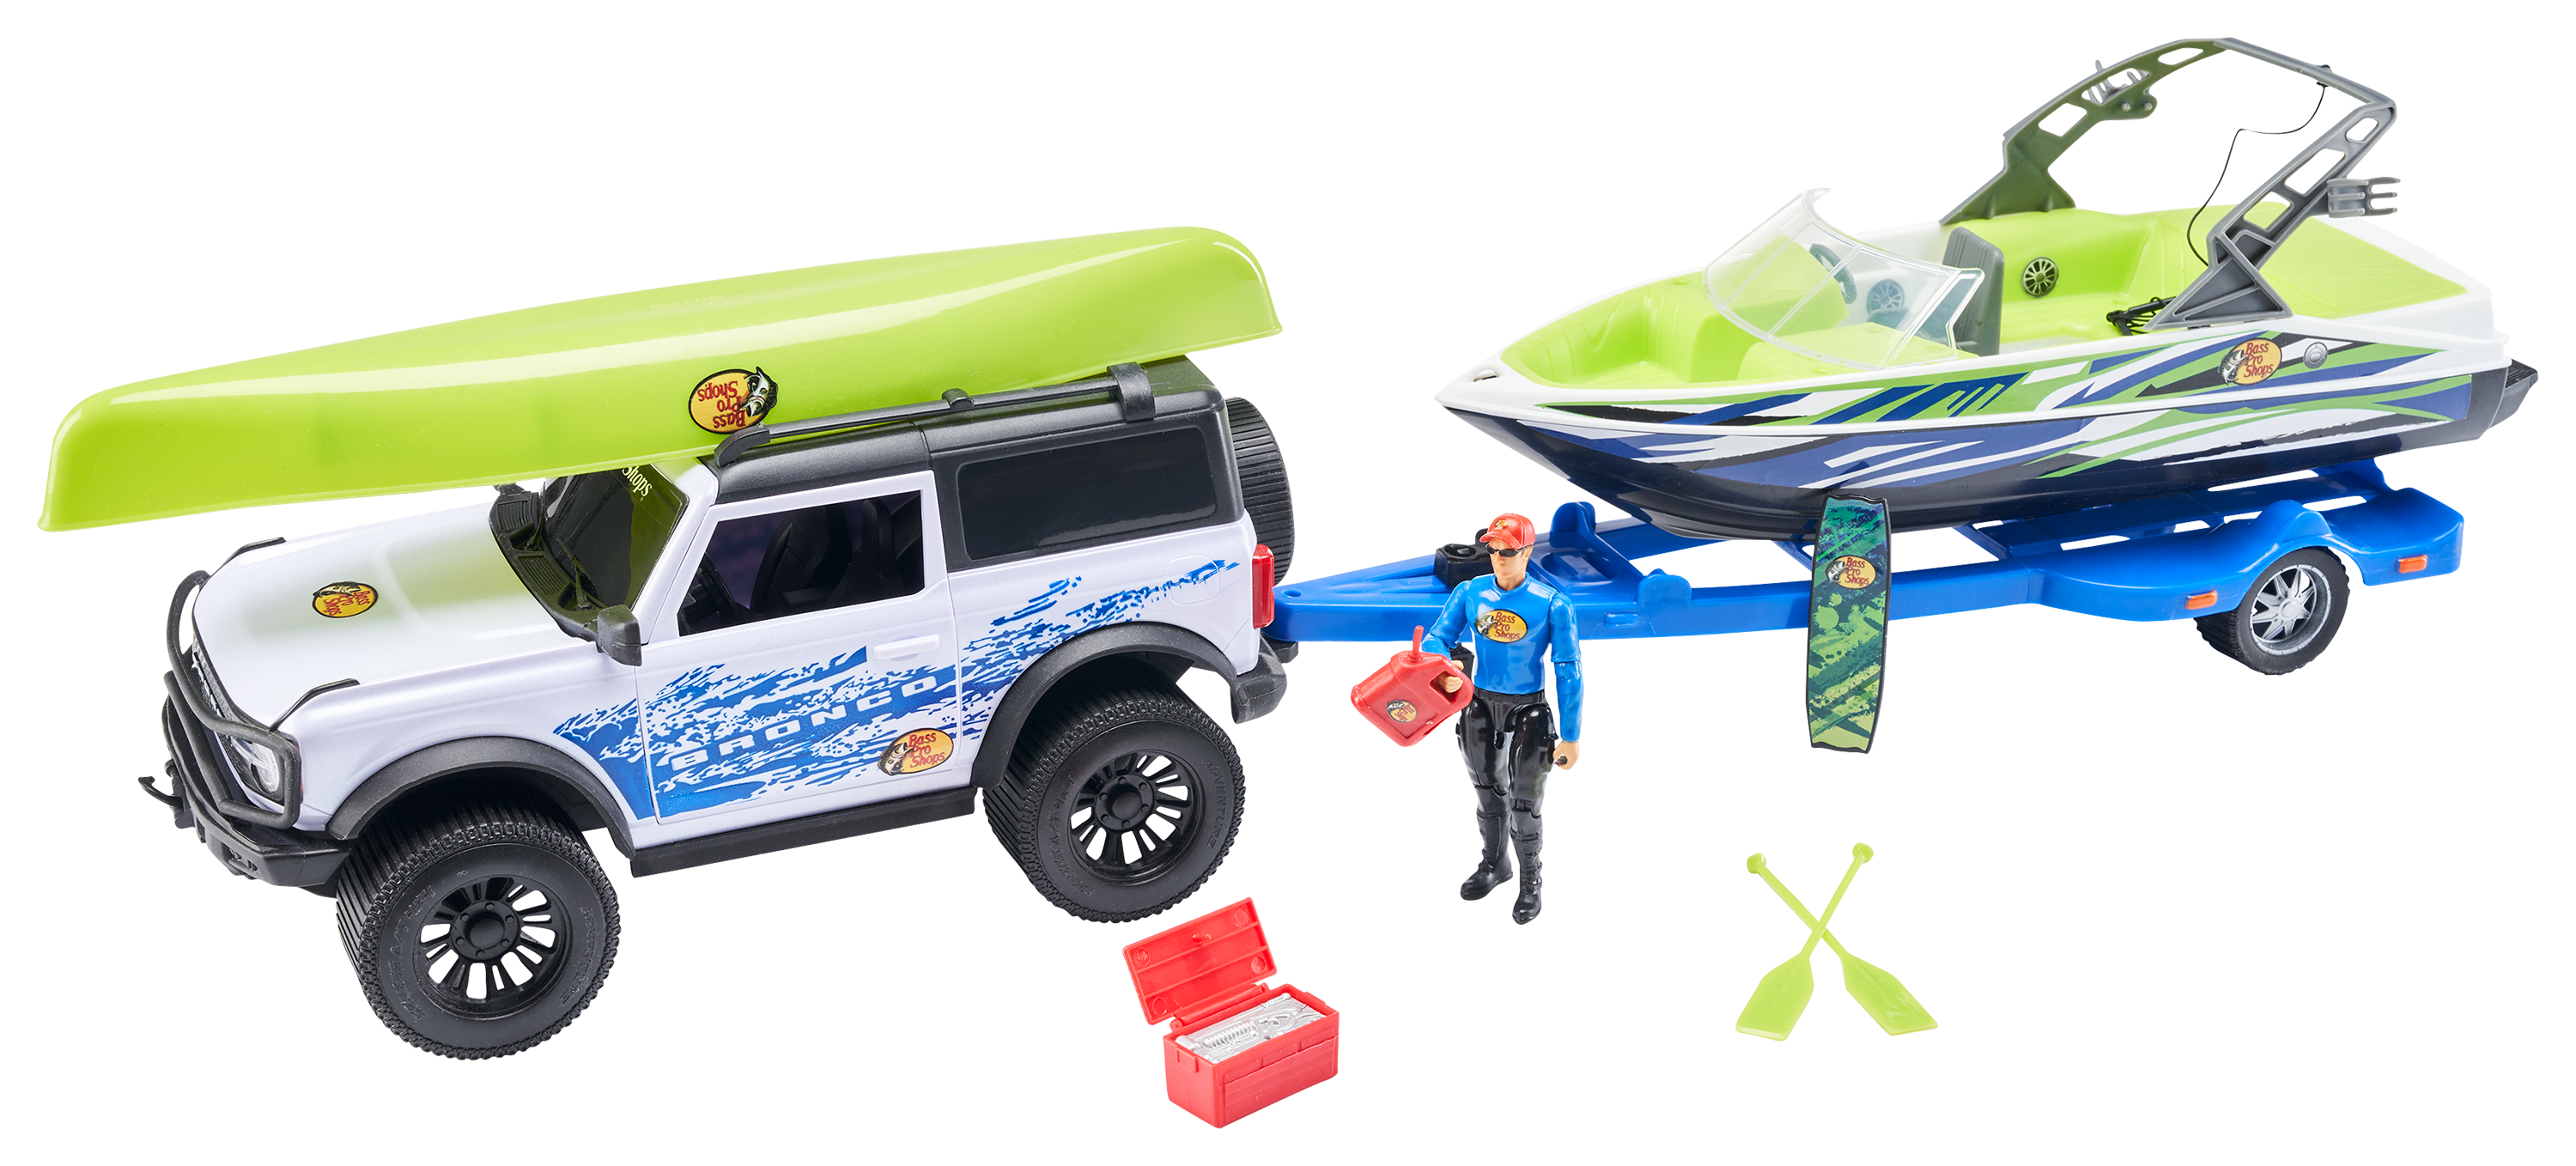 Bass Pro Shops Deluxe Ford Bronco Wake Boat Adventure Playset for